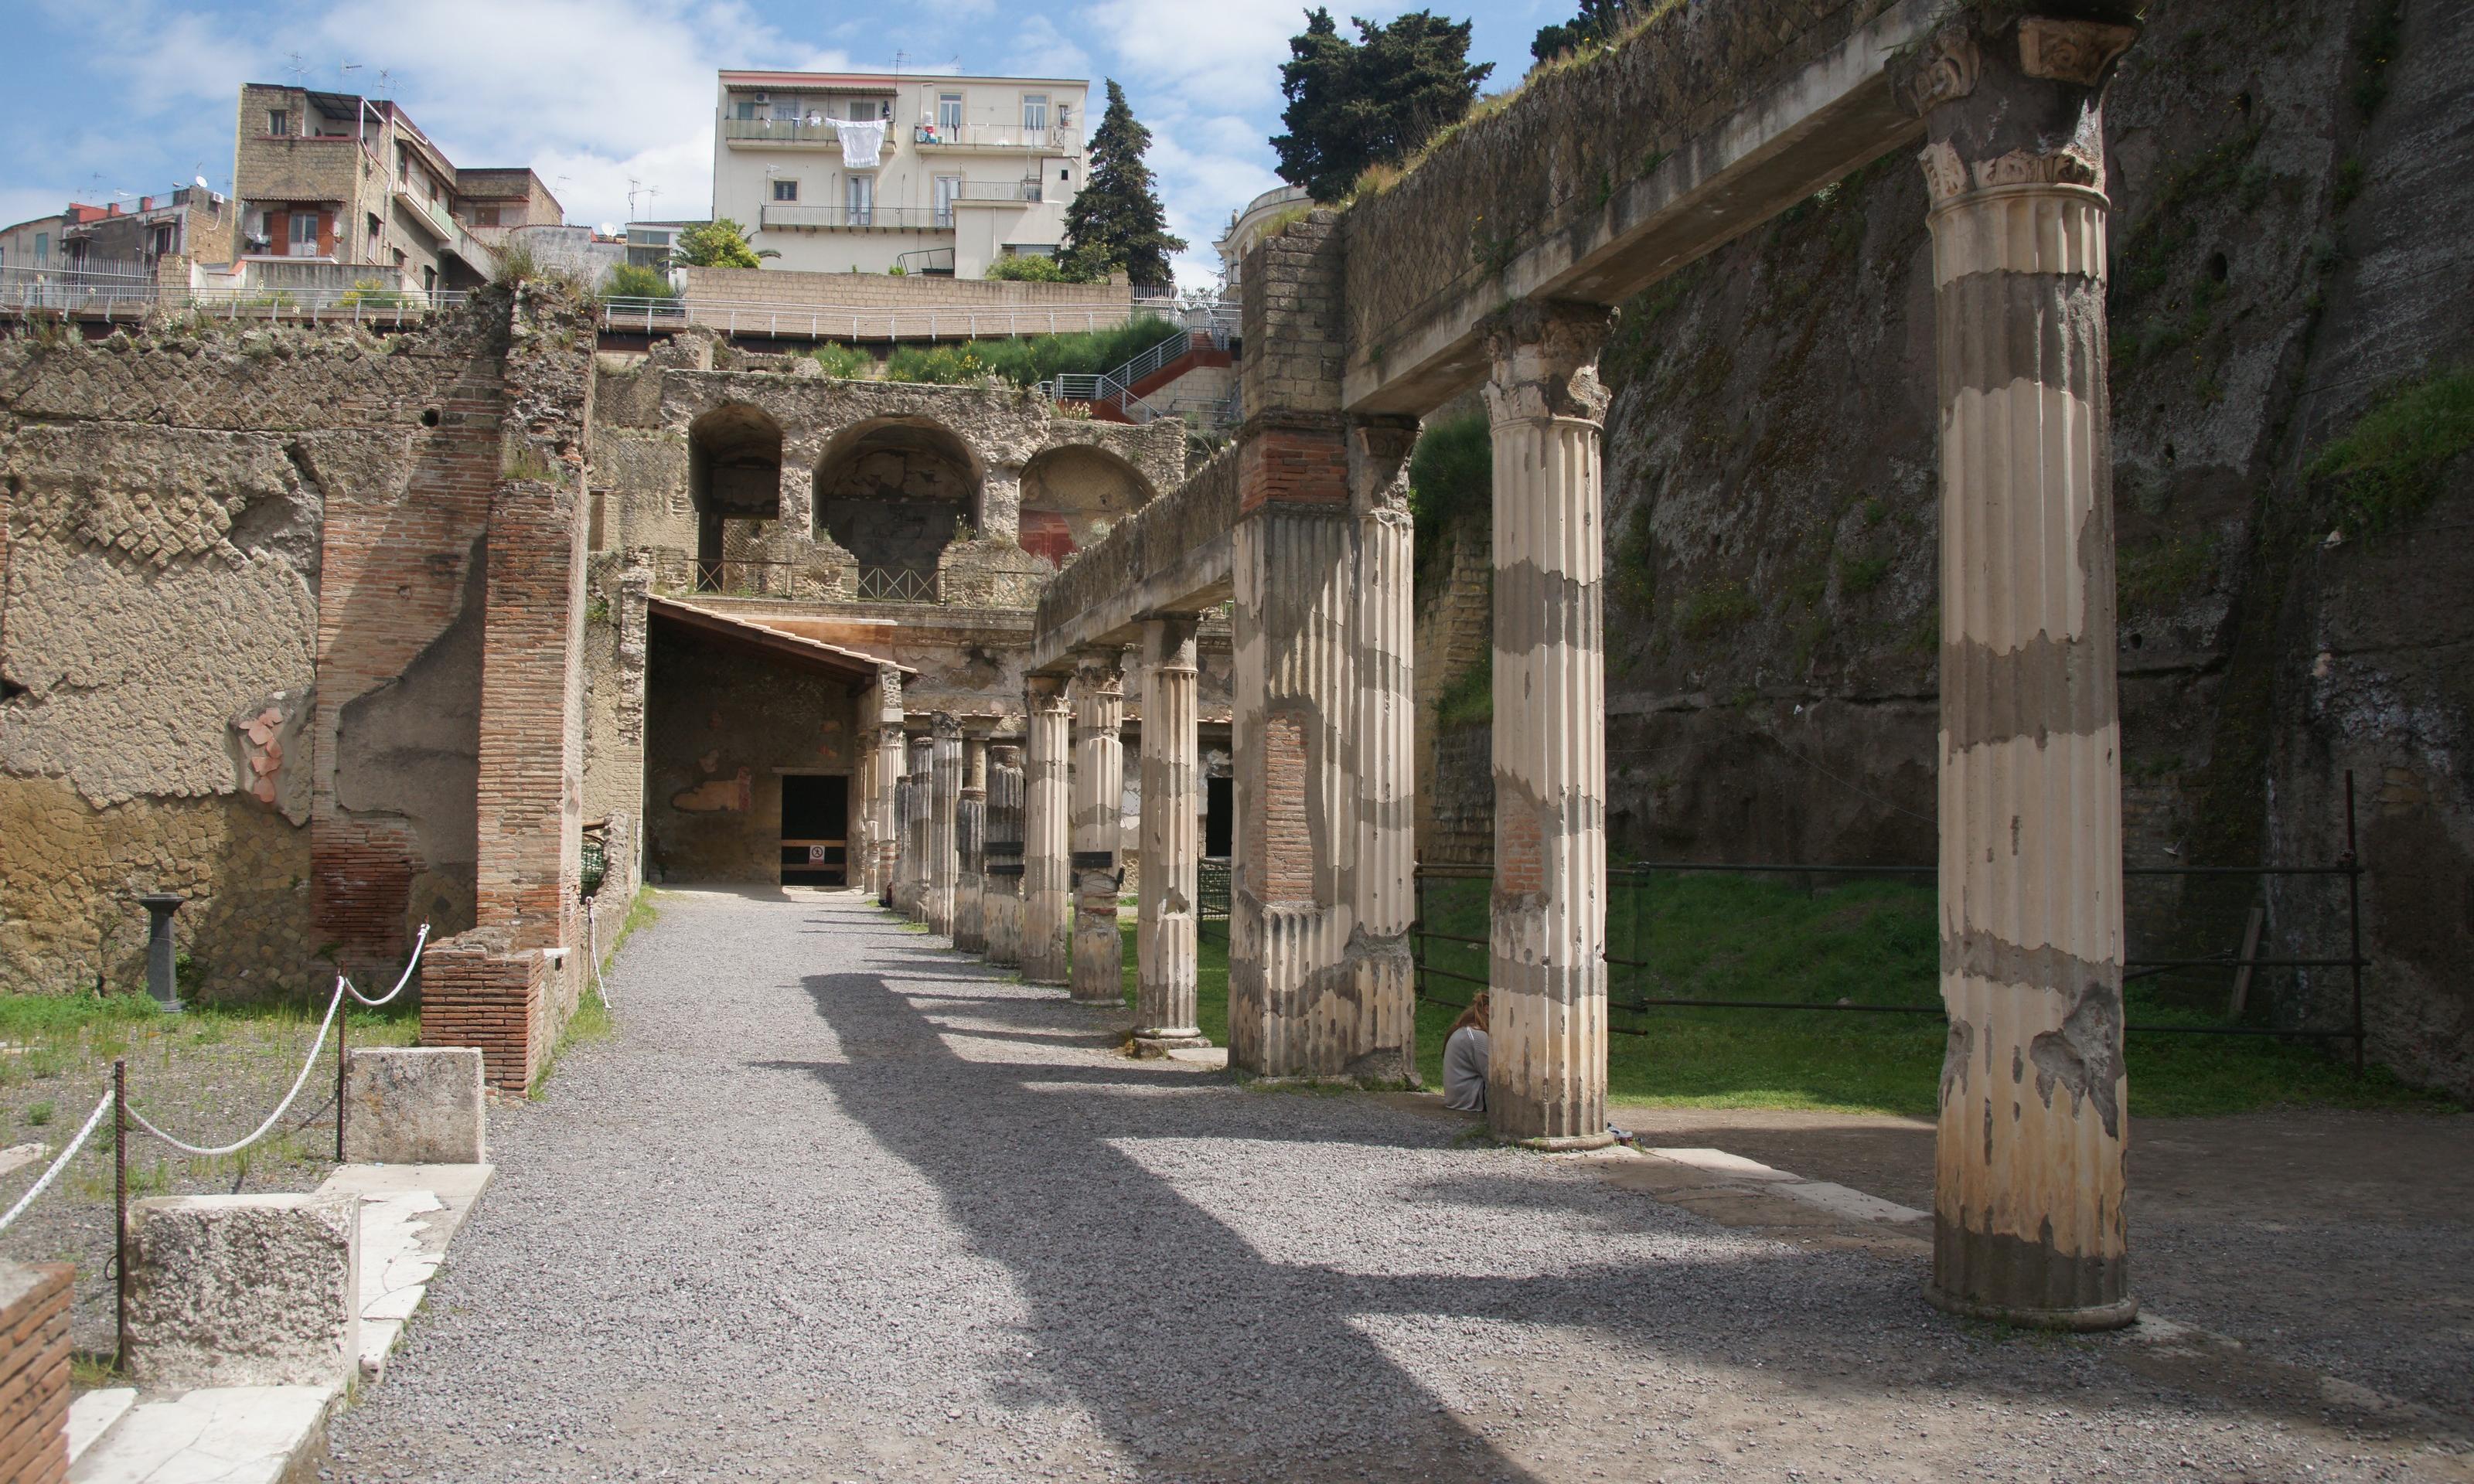 Excursion to the Herculaneum Archeological Site - Departure from Naples